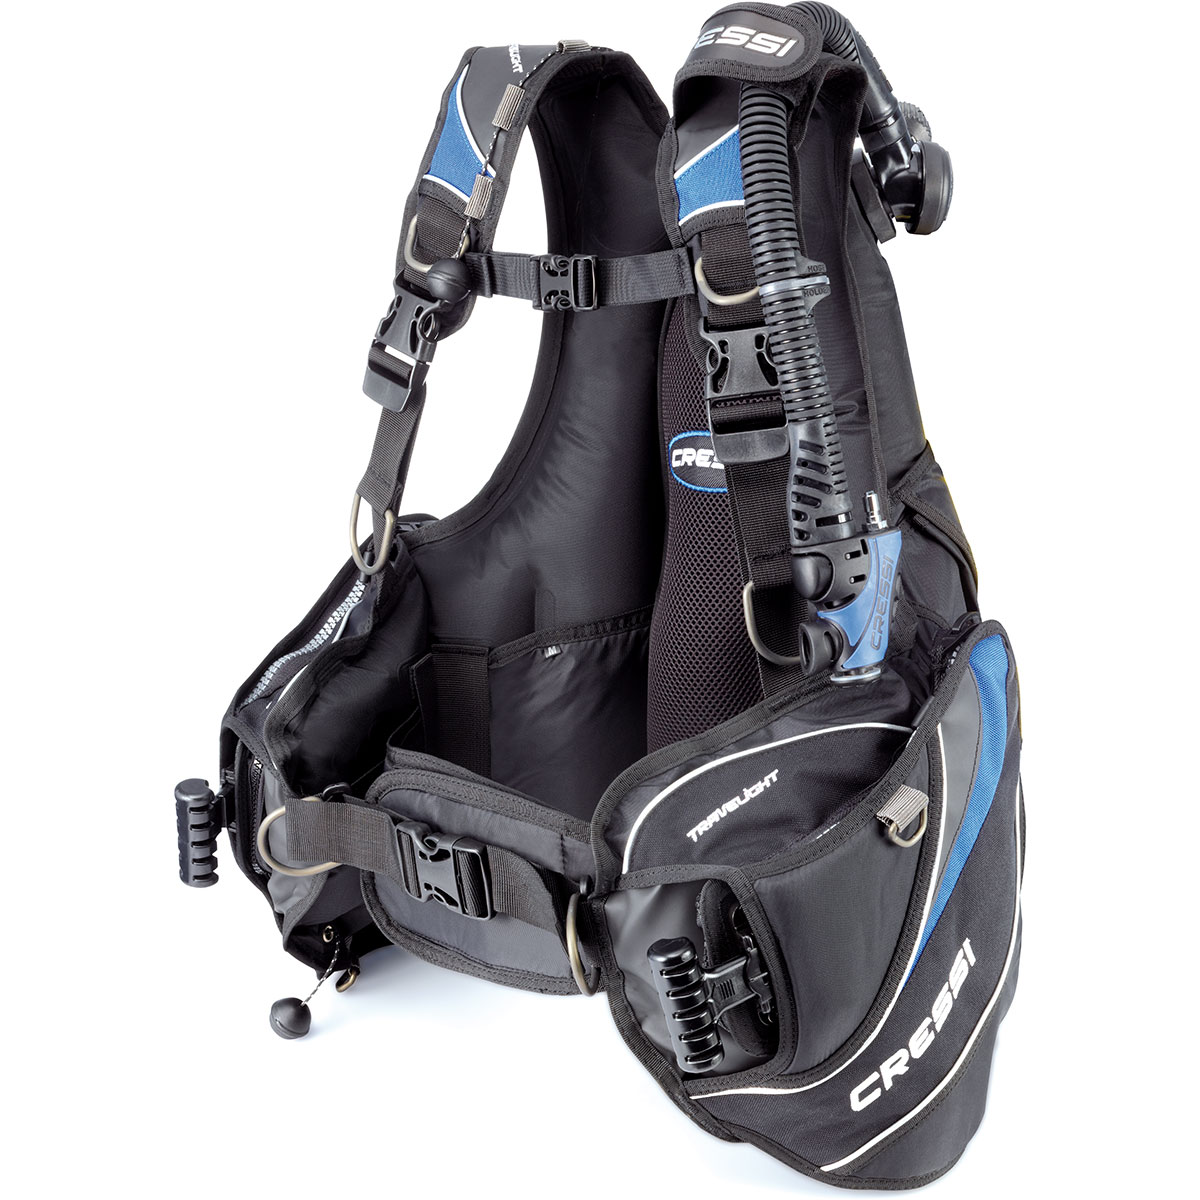 The best scuba BCD overall